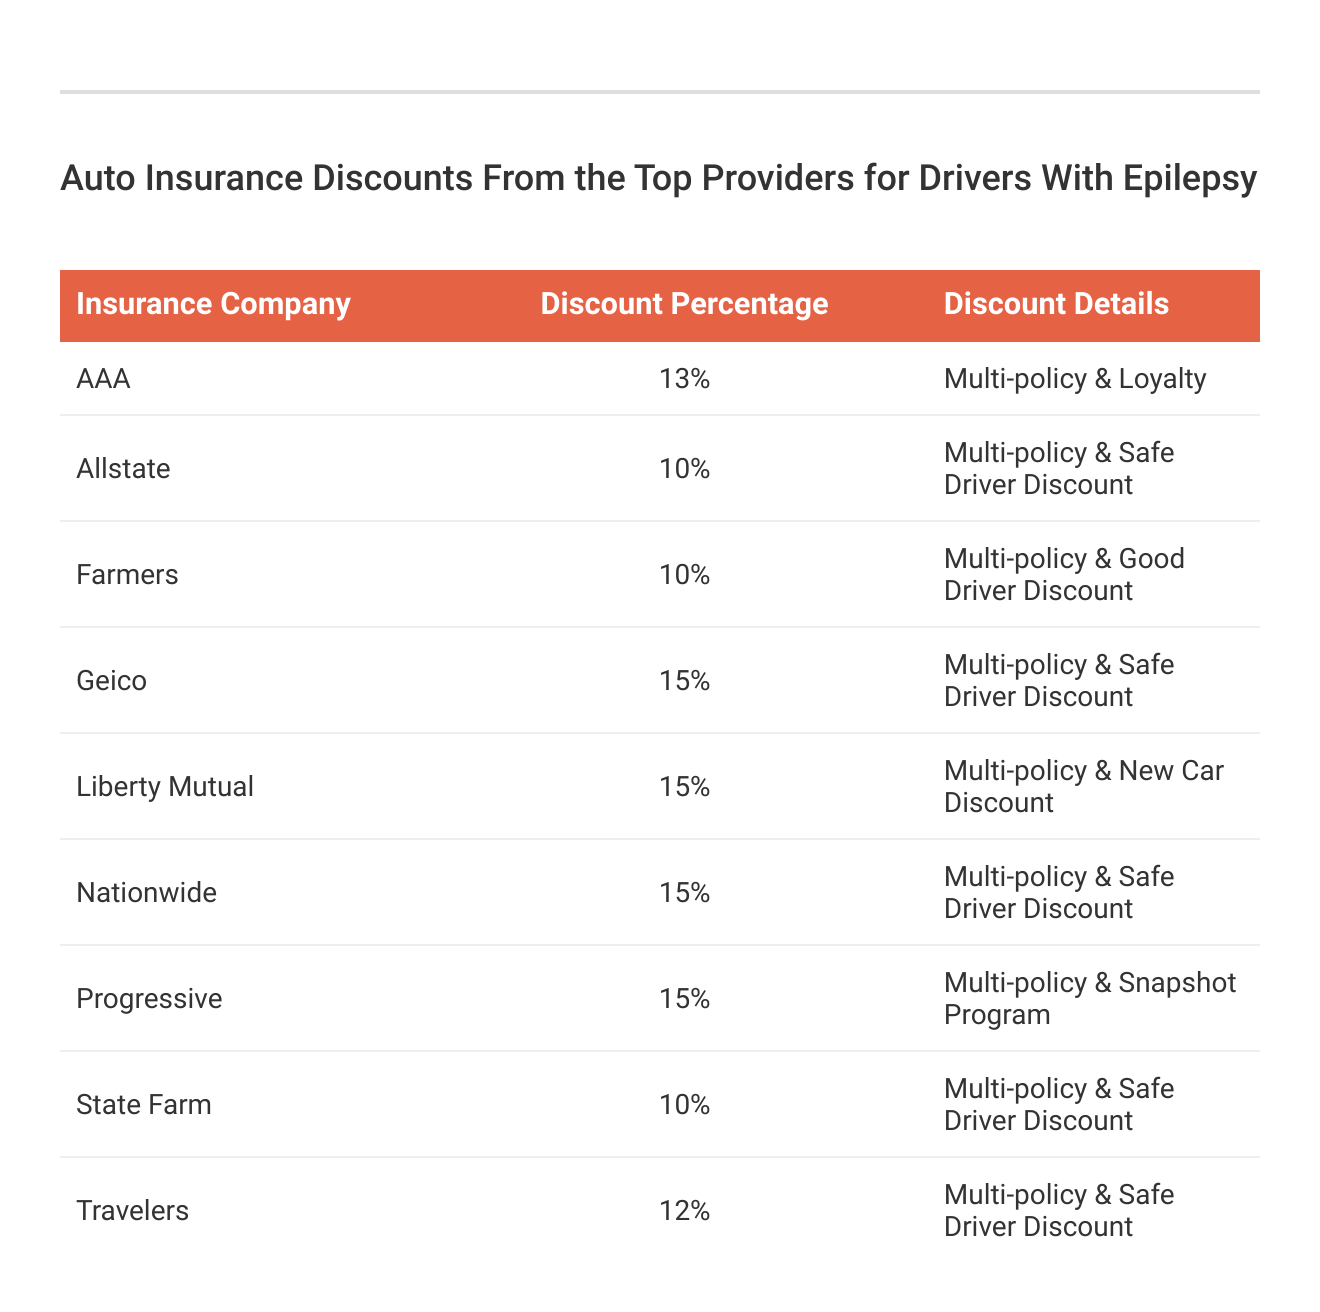 <h3>Auto Insurance Discounts From the Top Providers for Drivers With Epilepsy</h3>